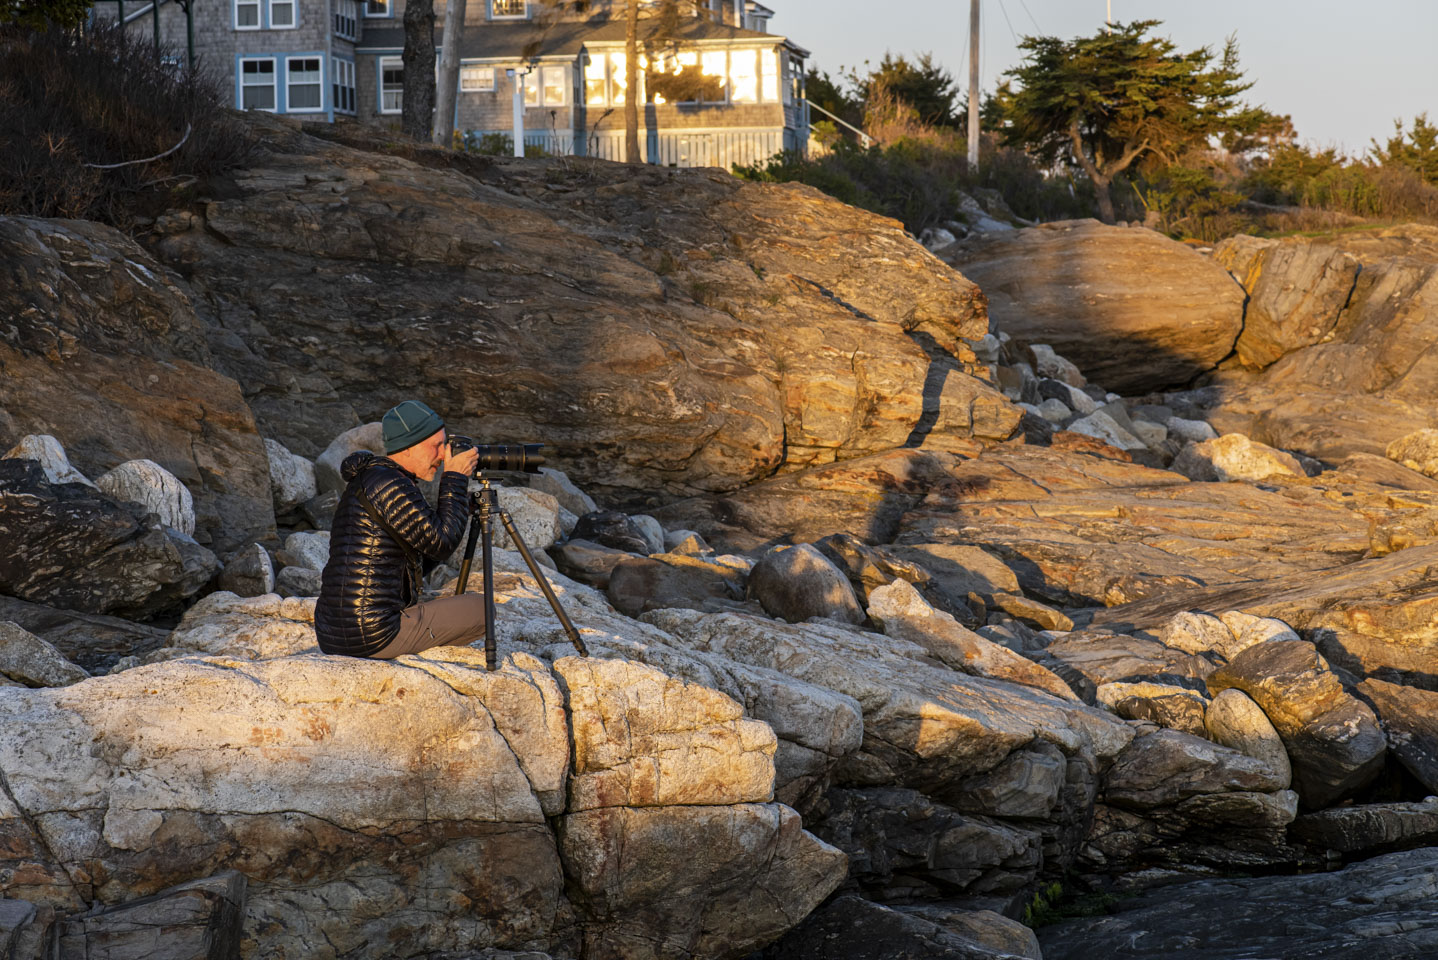 Paul sitting on rocks at Ocean Point as sunset, taking a photograph